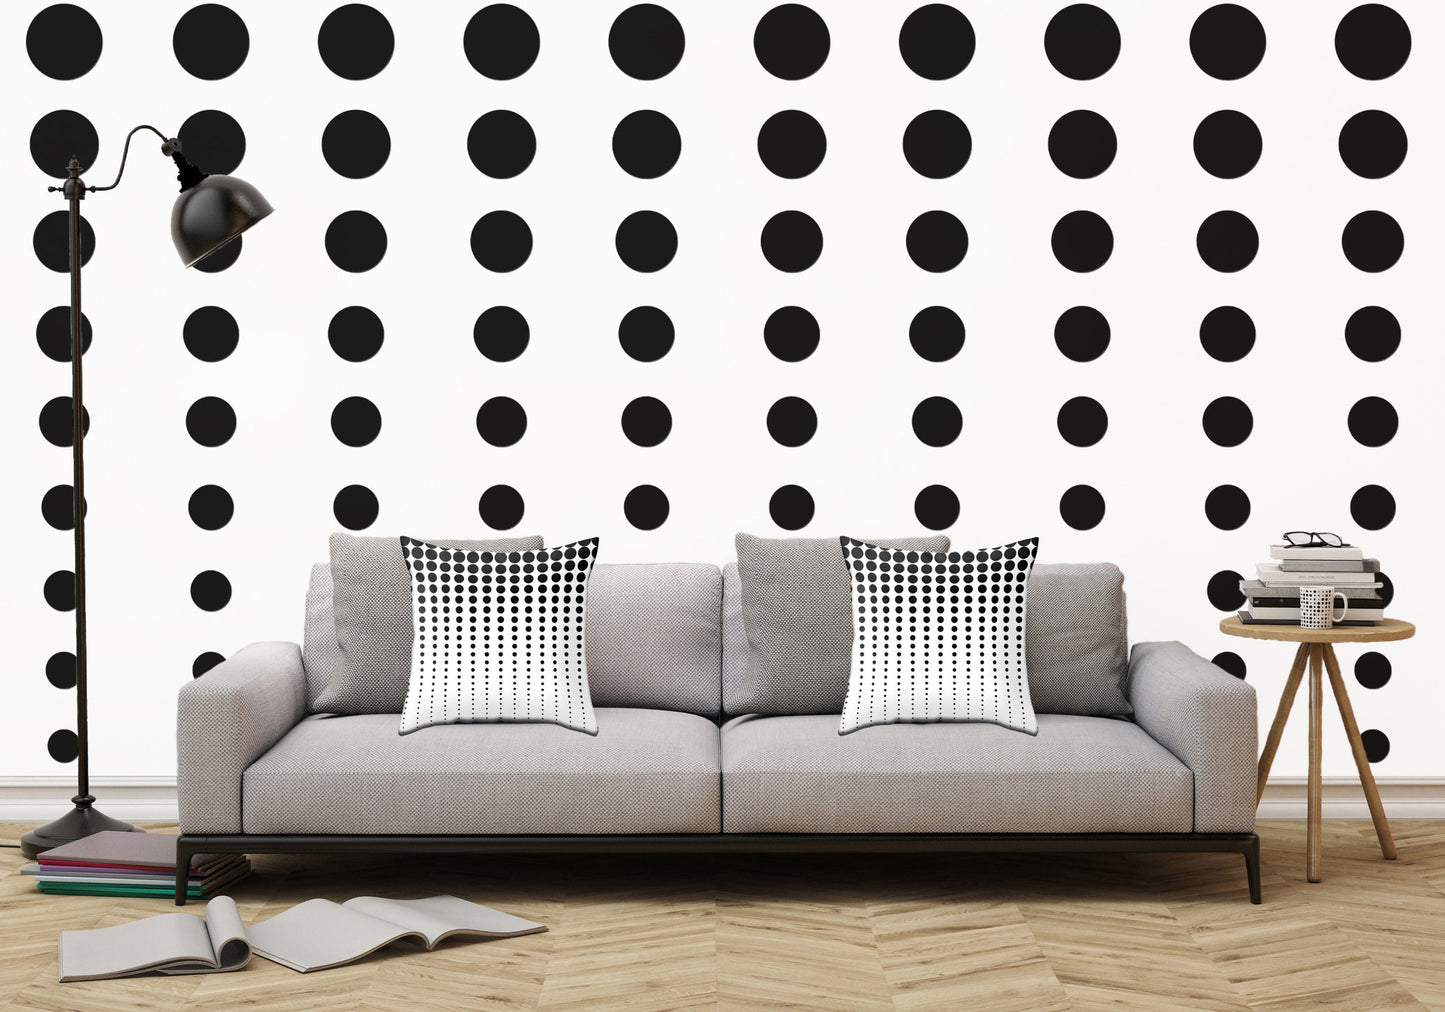 Reduced Black Dots on Solid White Illustration - Peel and Stick Removable Wallpaper Full Size Wall Mural  - PIPAFINEART